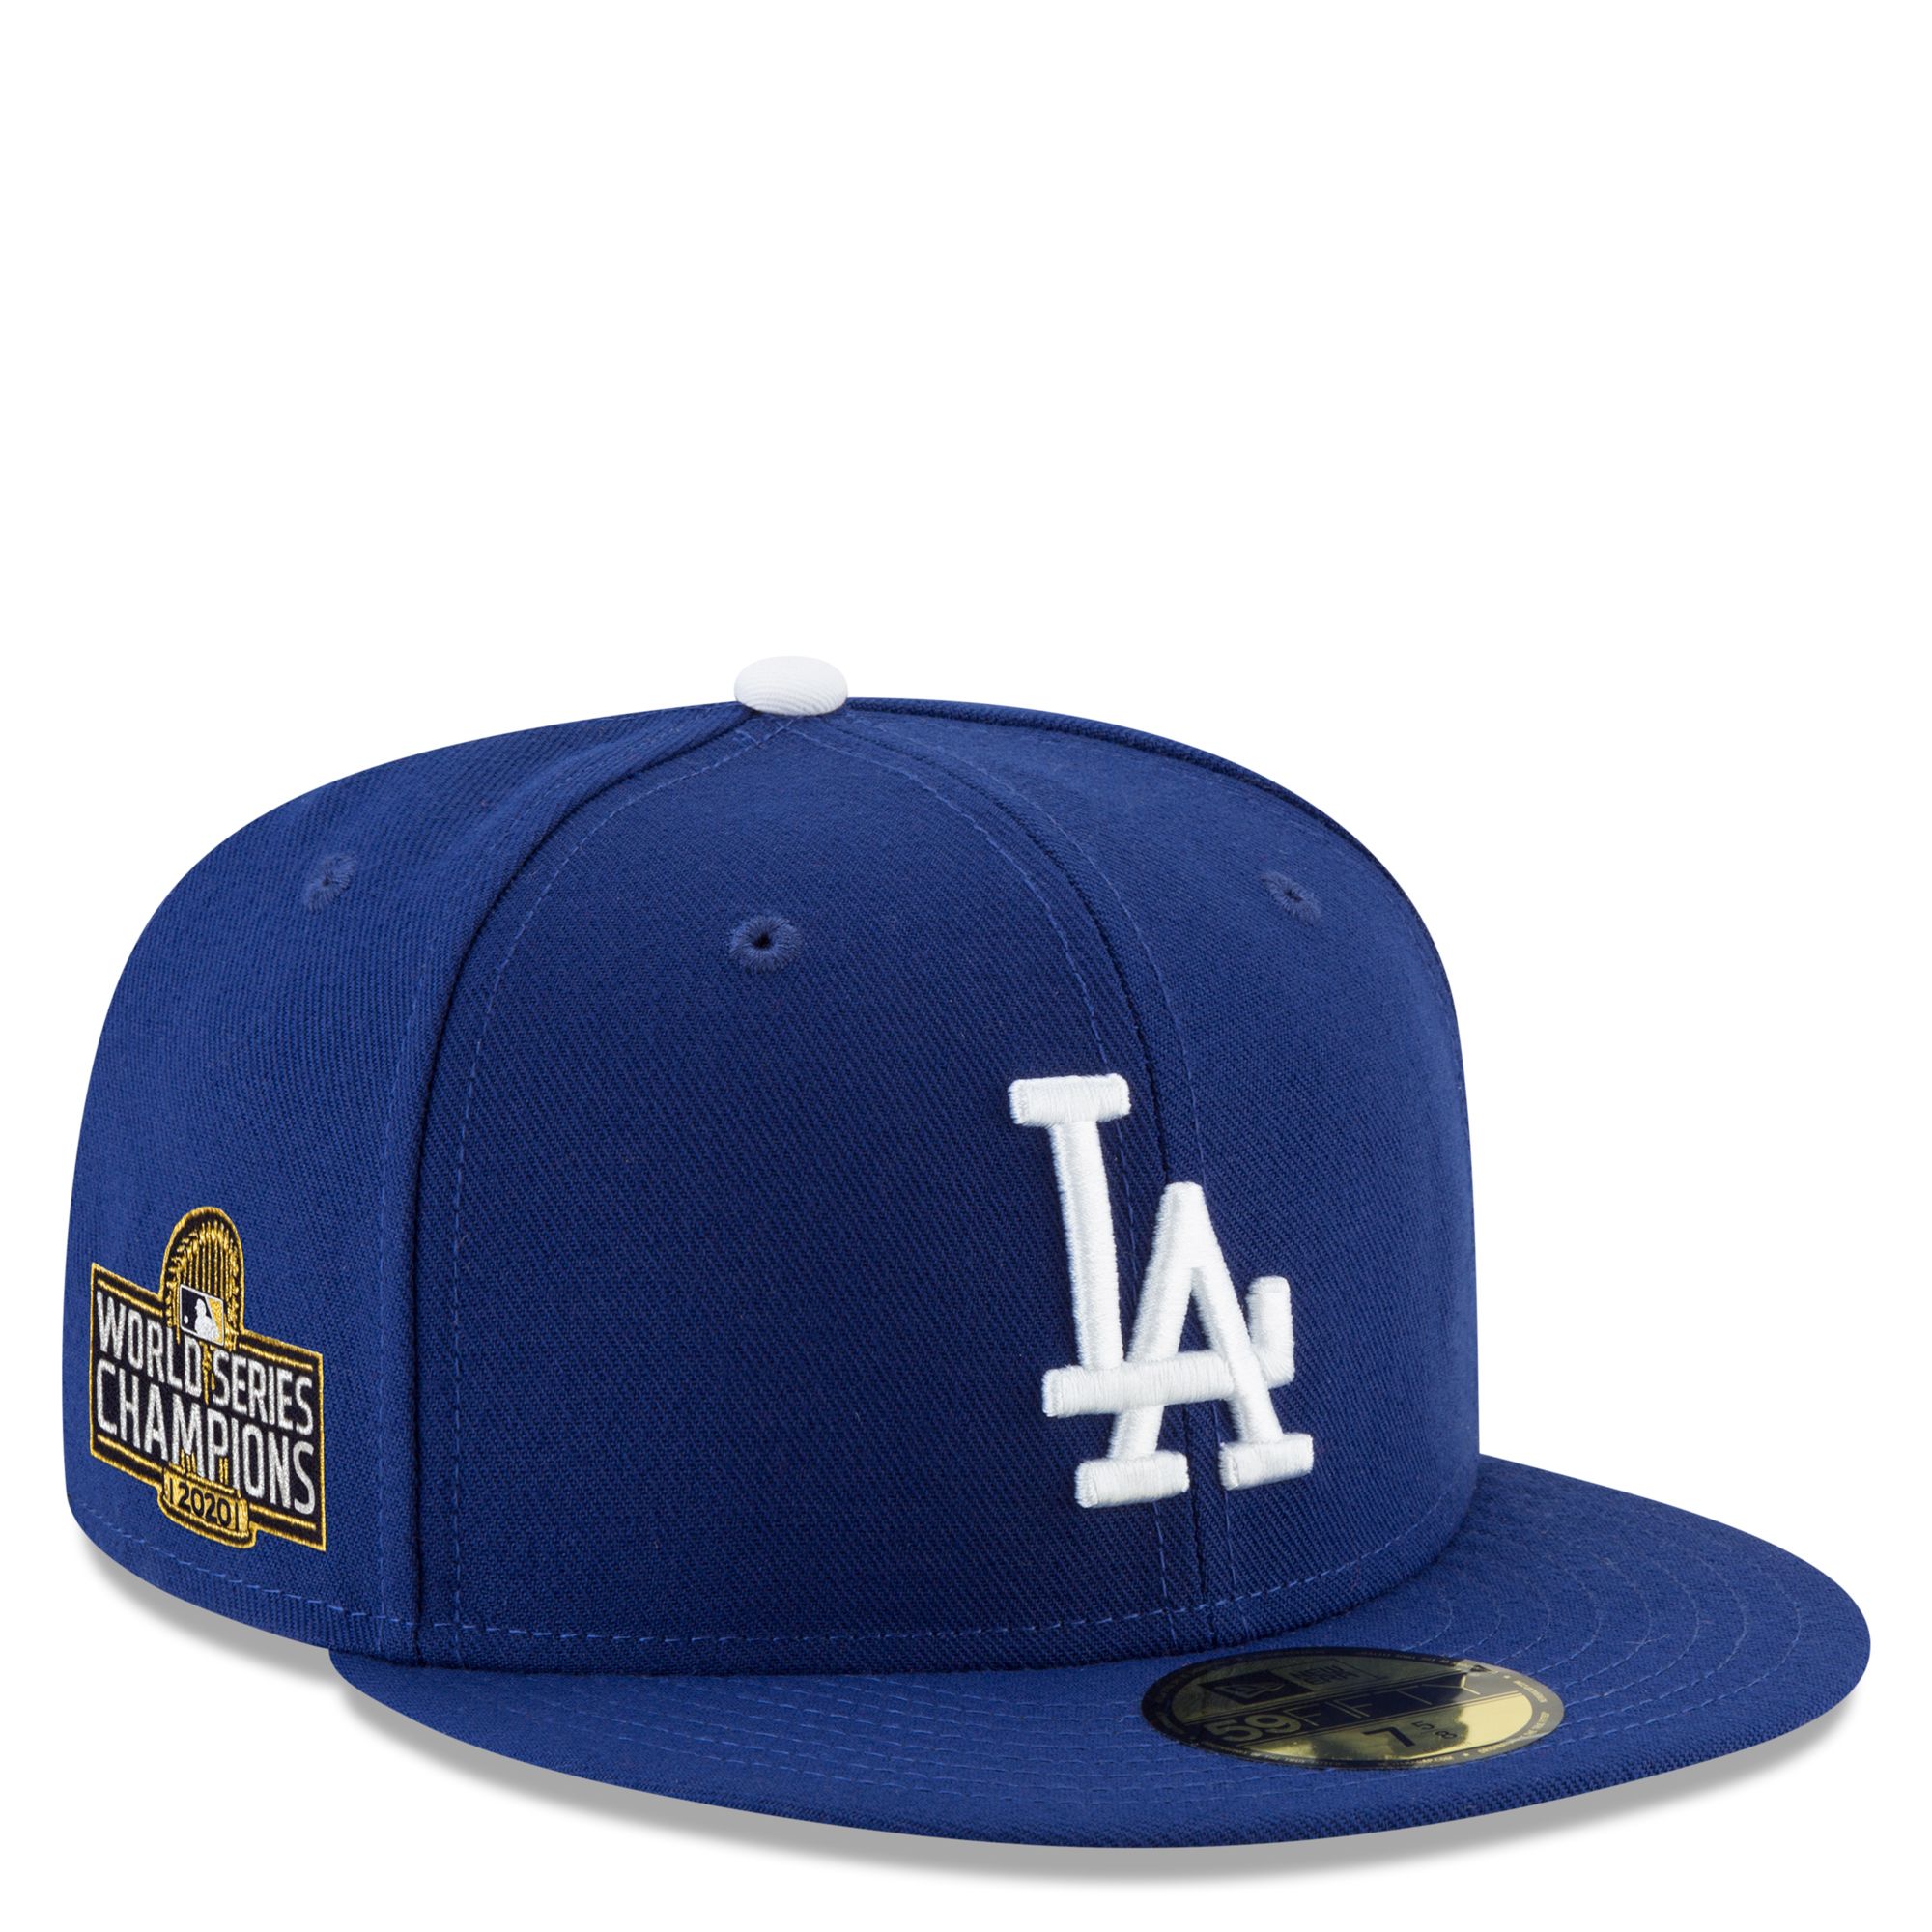 World Series Champions: Los Angeles Dodgers – The Creative Company Shop